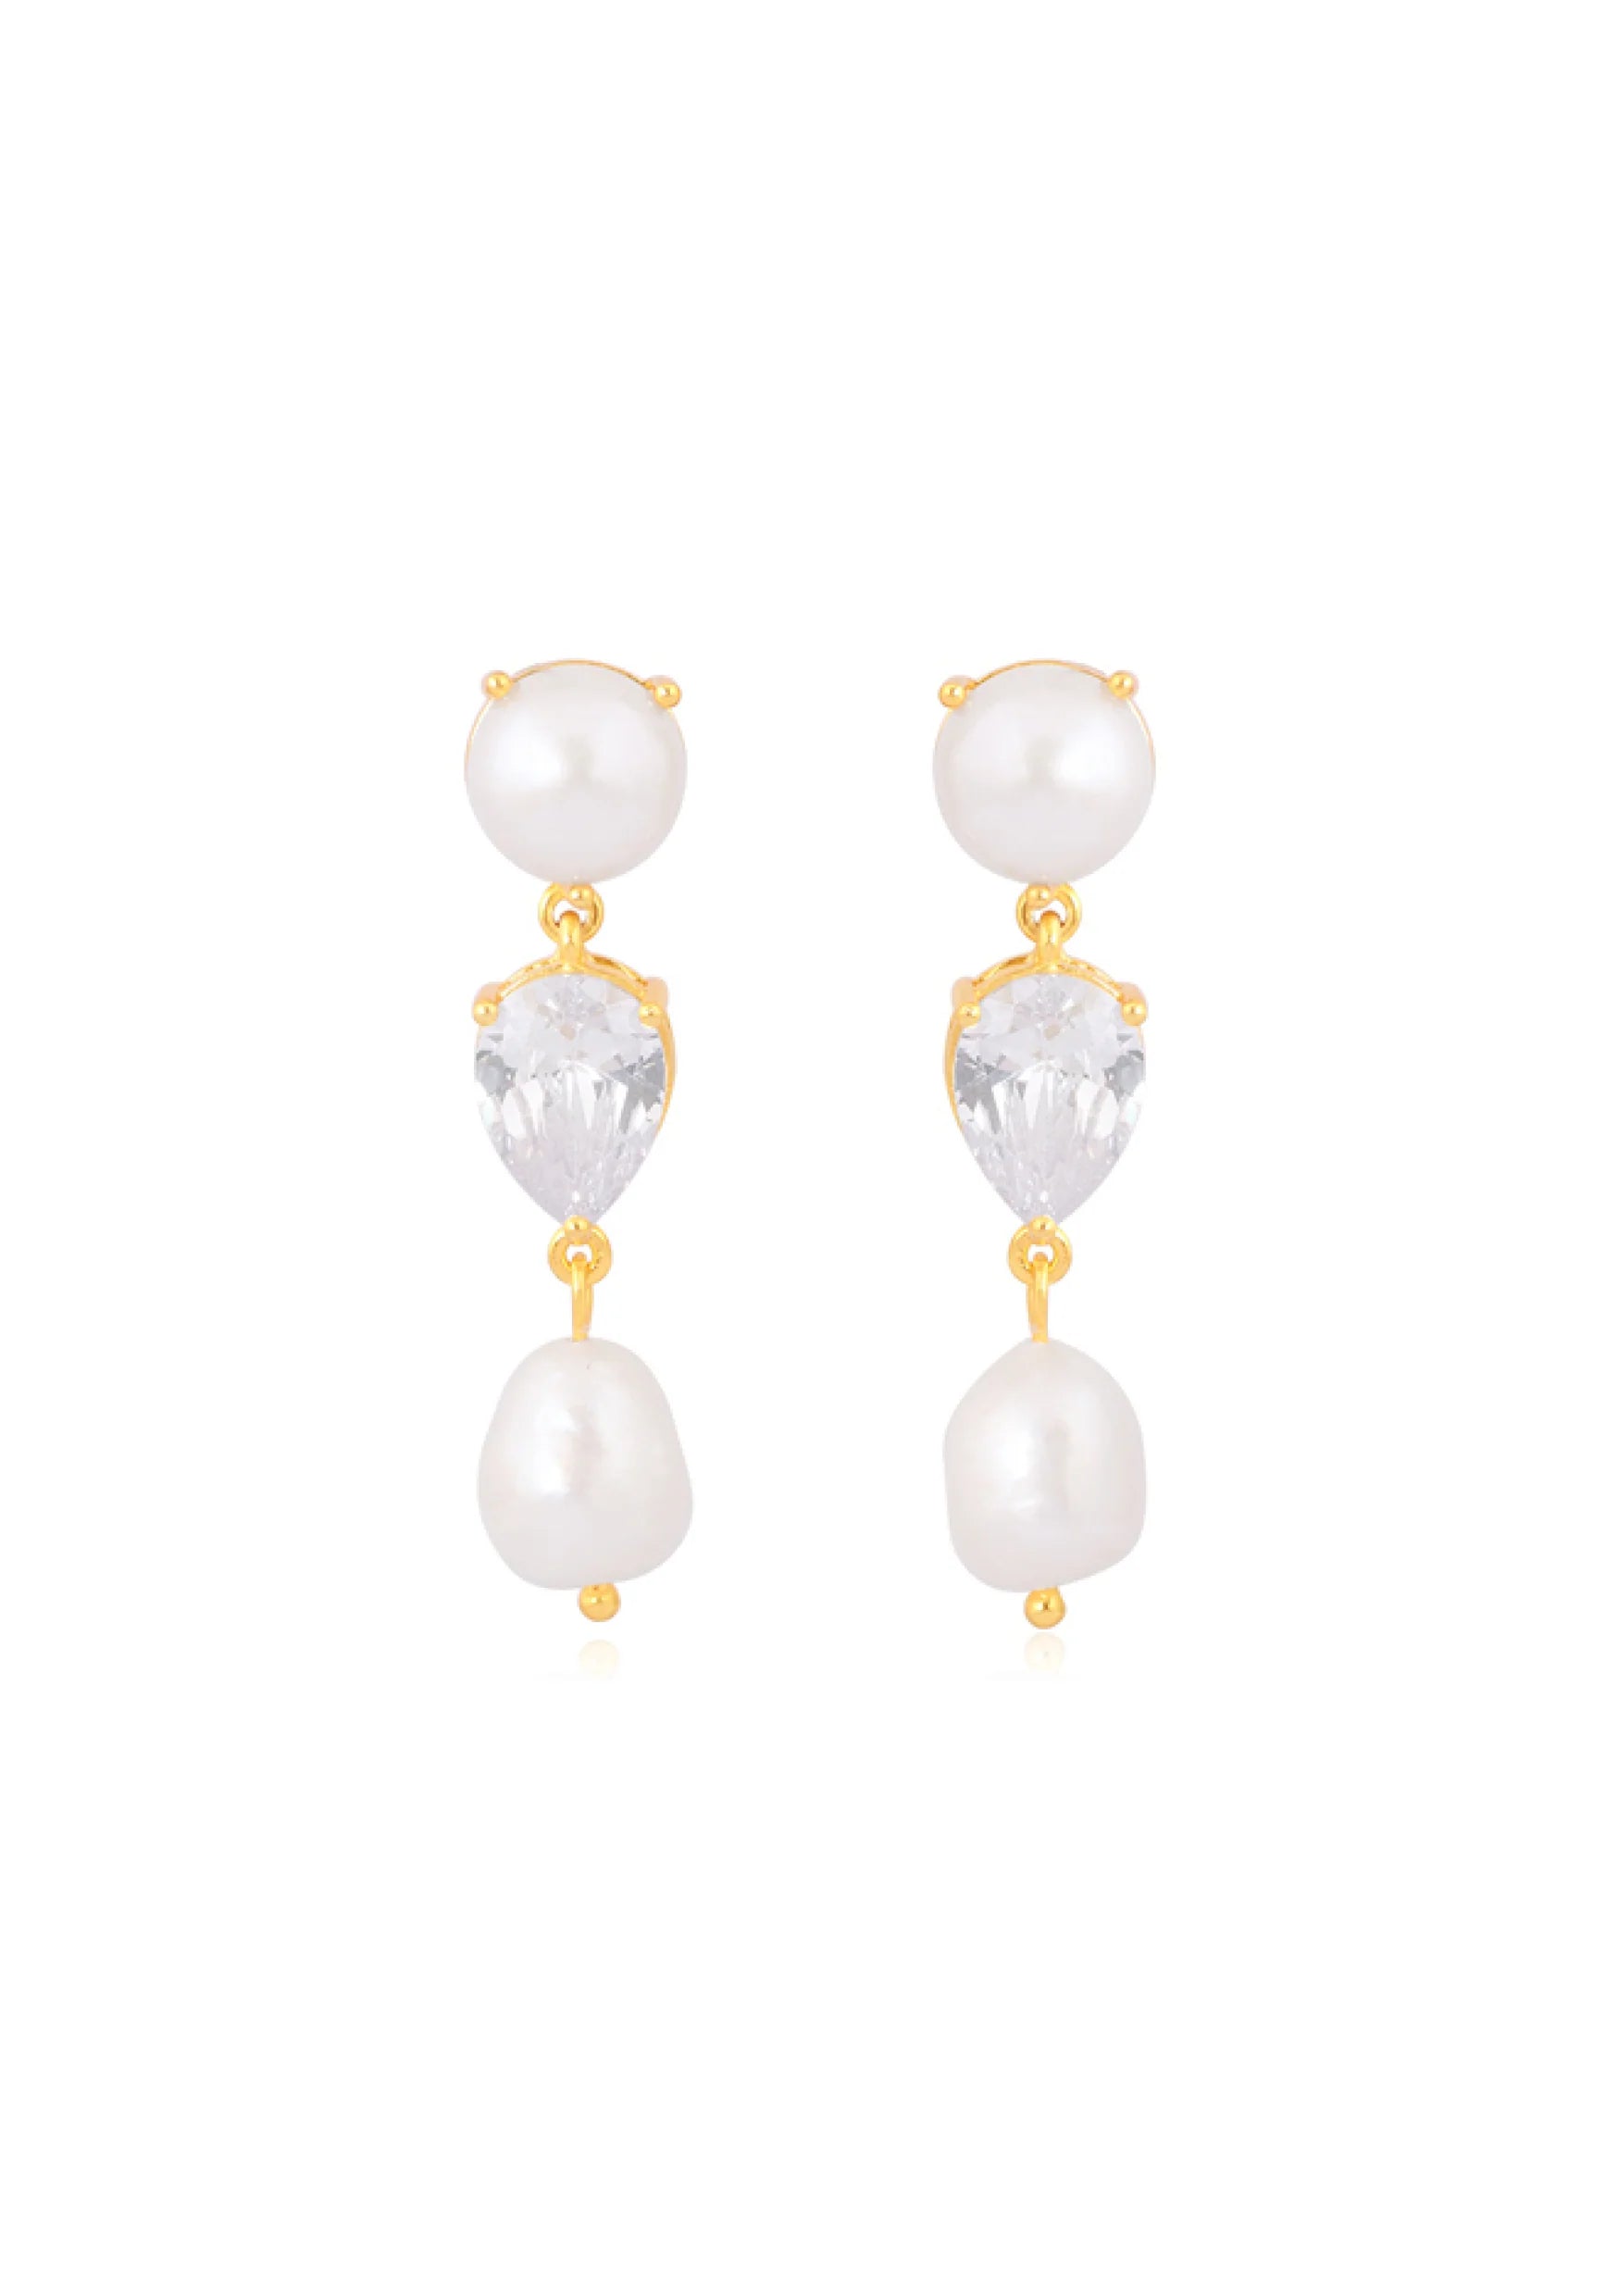 Lola Knight - Celine - Double Pearl And Crystal Drop Earrings - Gold